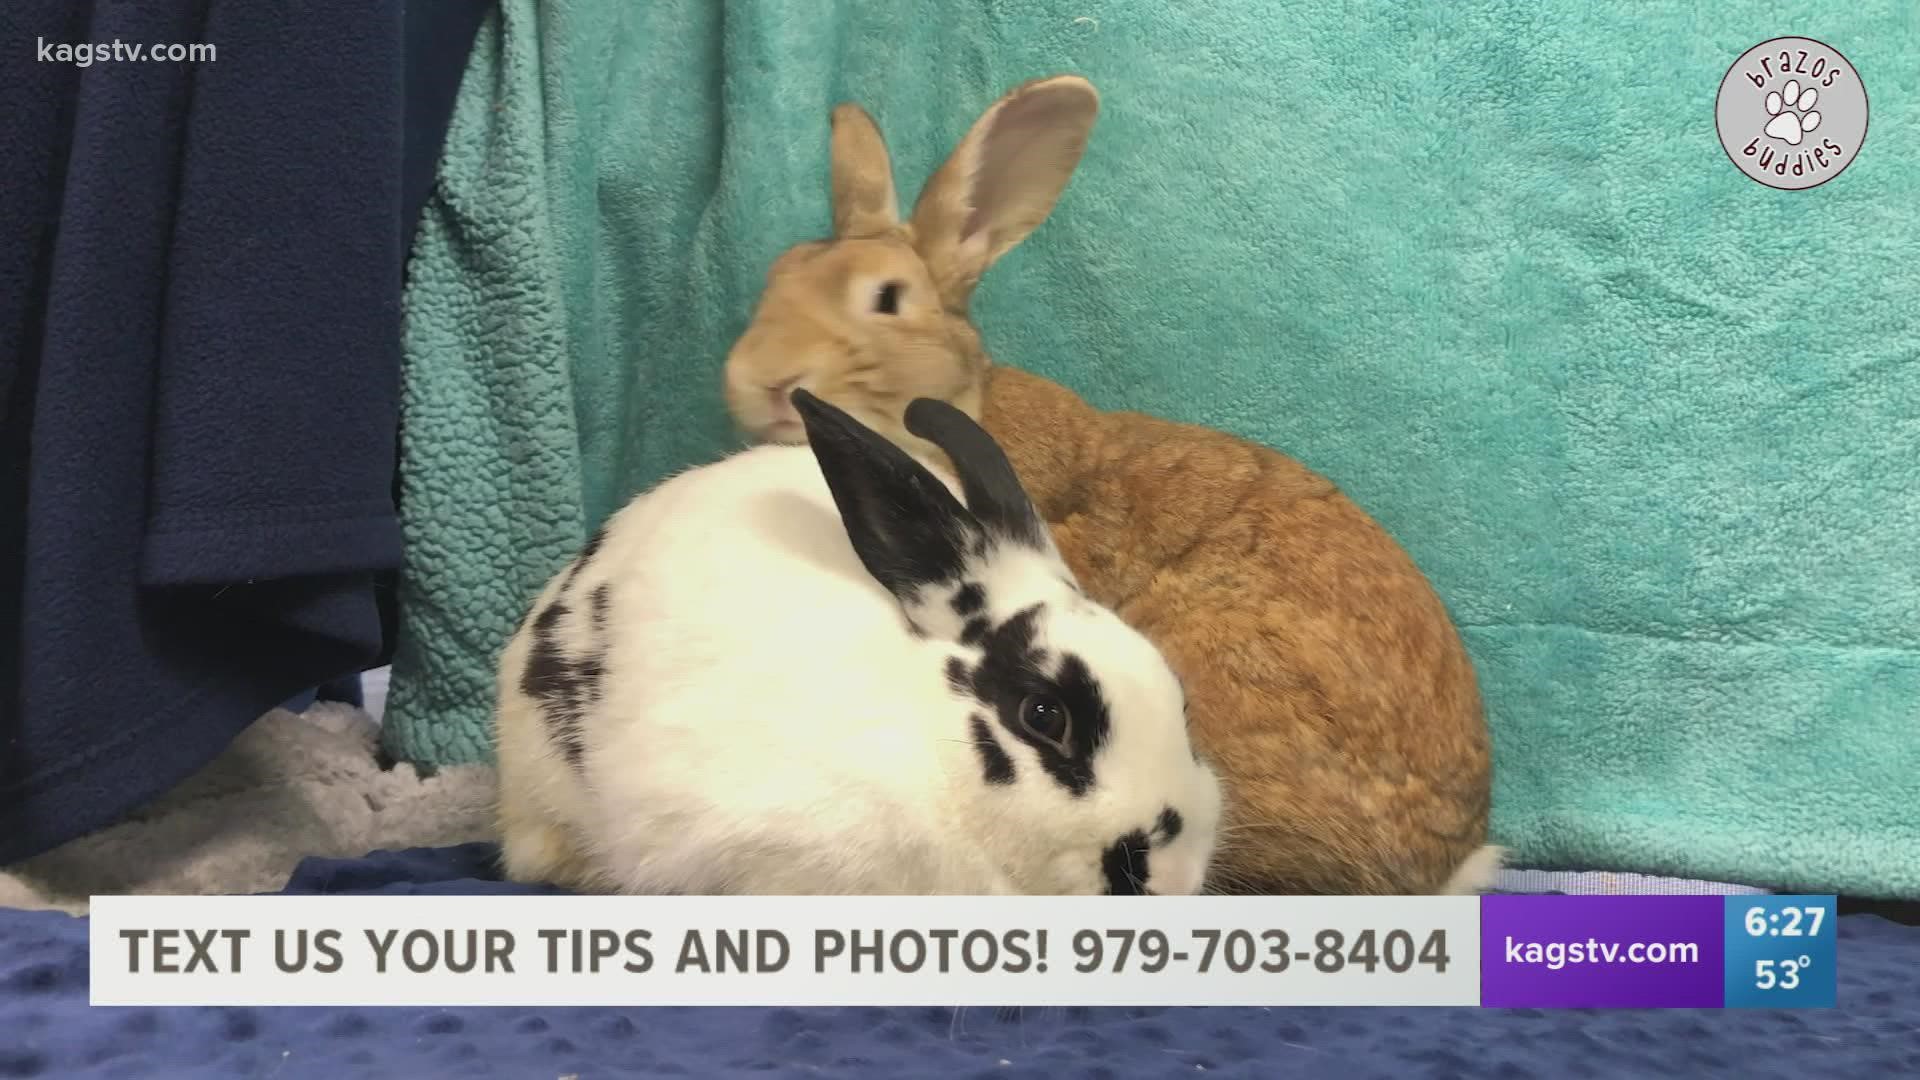 This bunny bunch is available for adoption now at the Bryan Animal Center